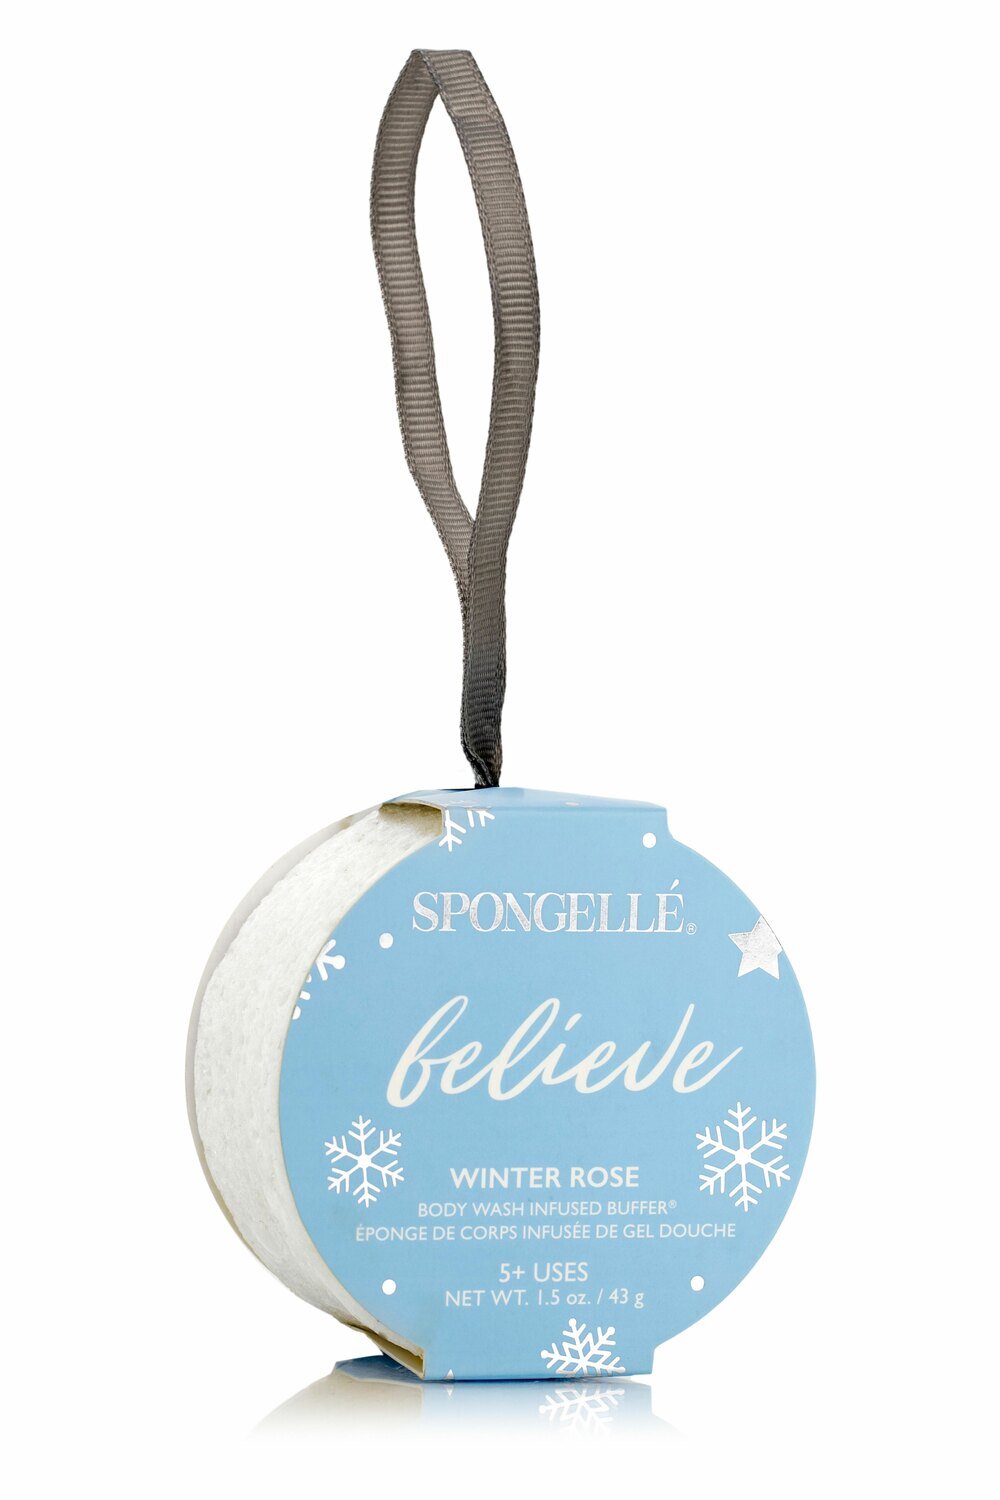 Spongelle Holiday Ornaments Believe Winter Rose Blue 5+ Washes 1.5Oz Pack of 6 AST-HOWR